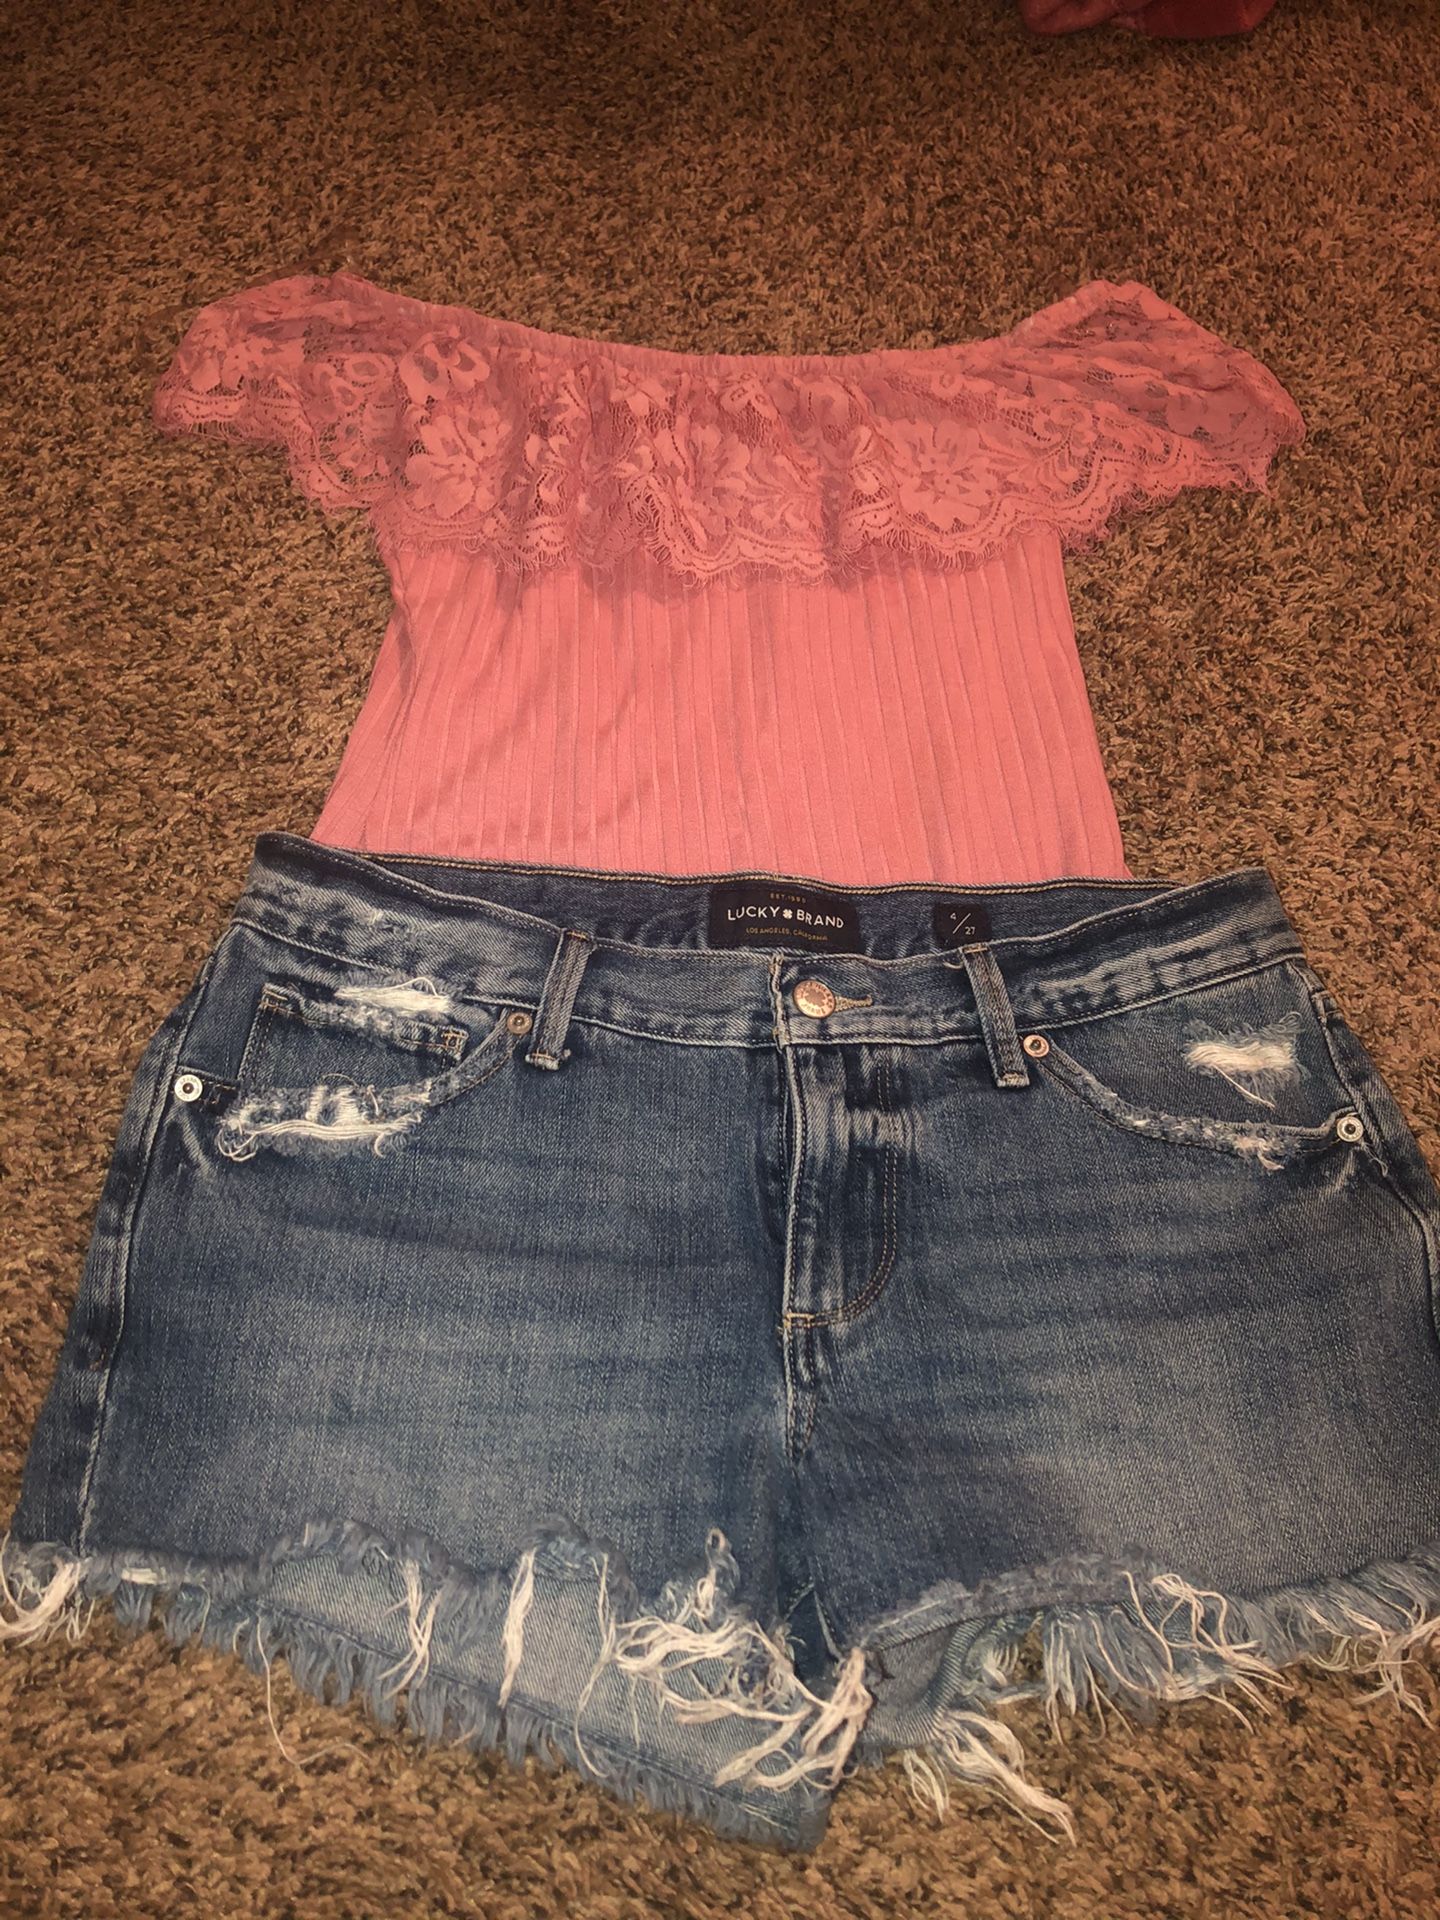 Lucky brand size 4 /27 and top size large